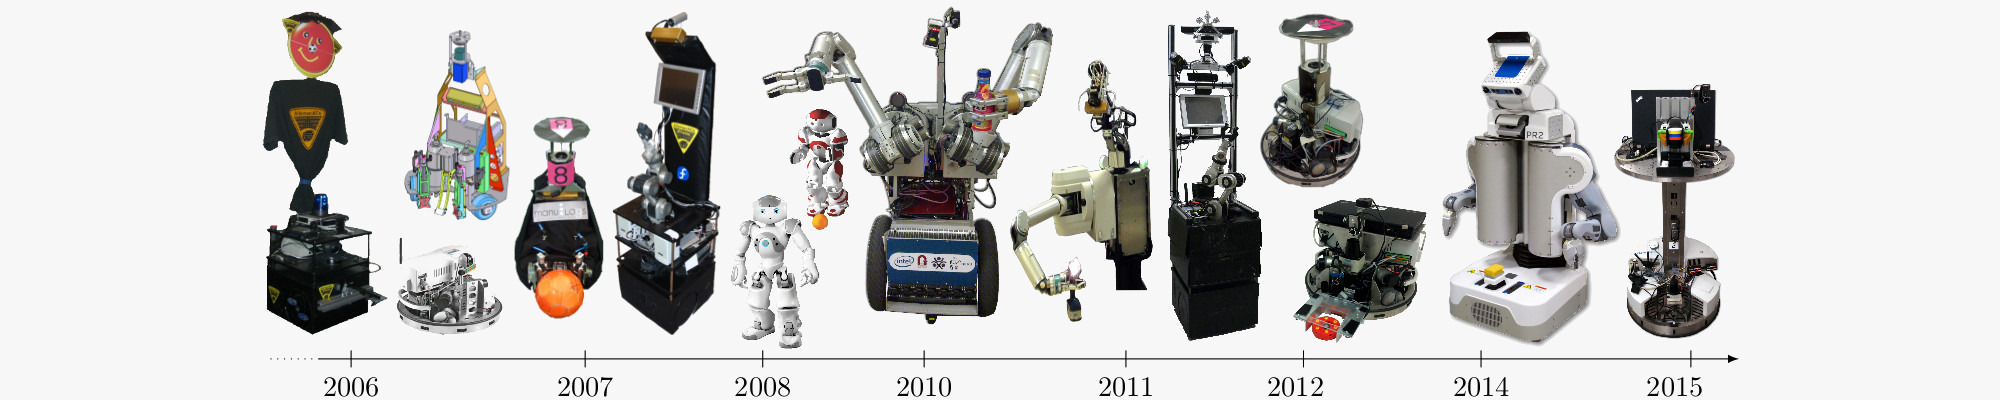 Robots used to develop Fawkes (or components) over time